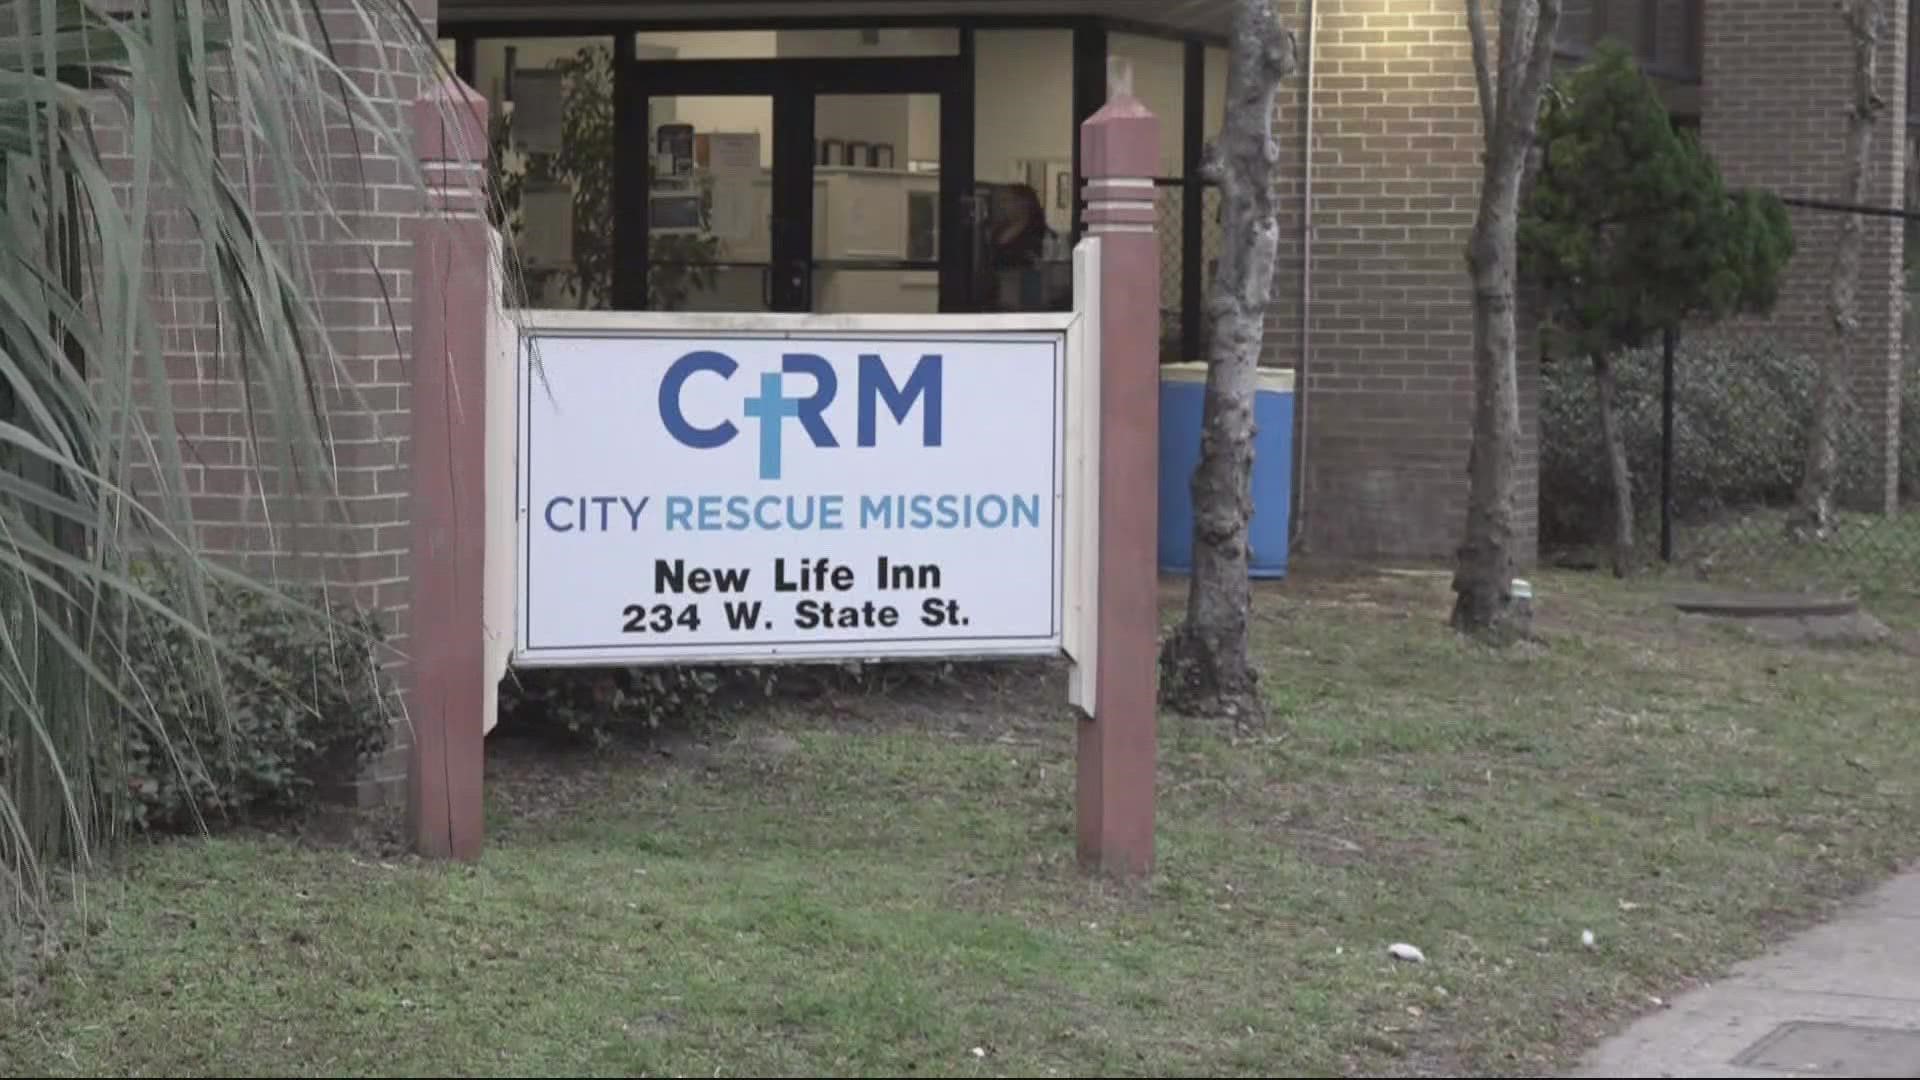 The City Rescue Mission is keeping doors open this weekend.